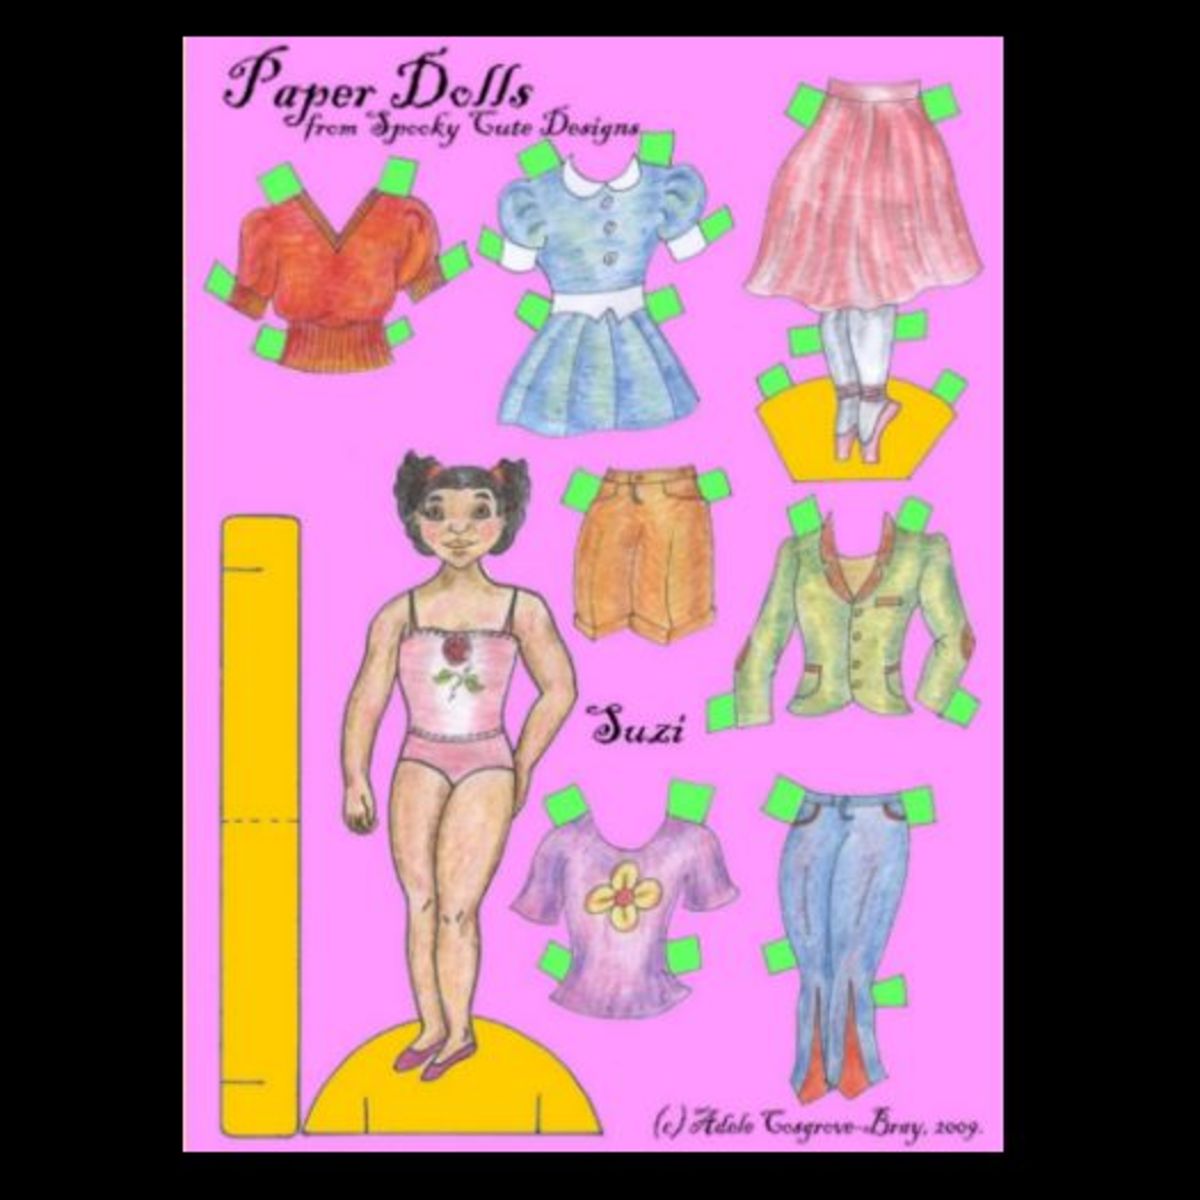 Paper Dolls - A Fun Creative Activity for Children. Includes Free Paper Dolls.